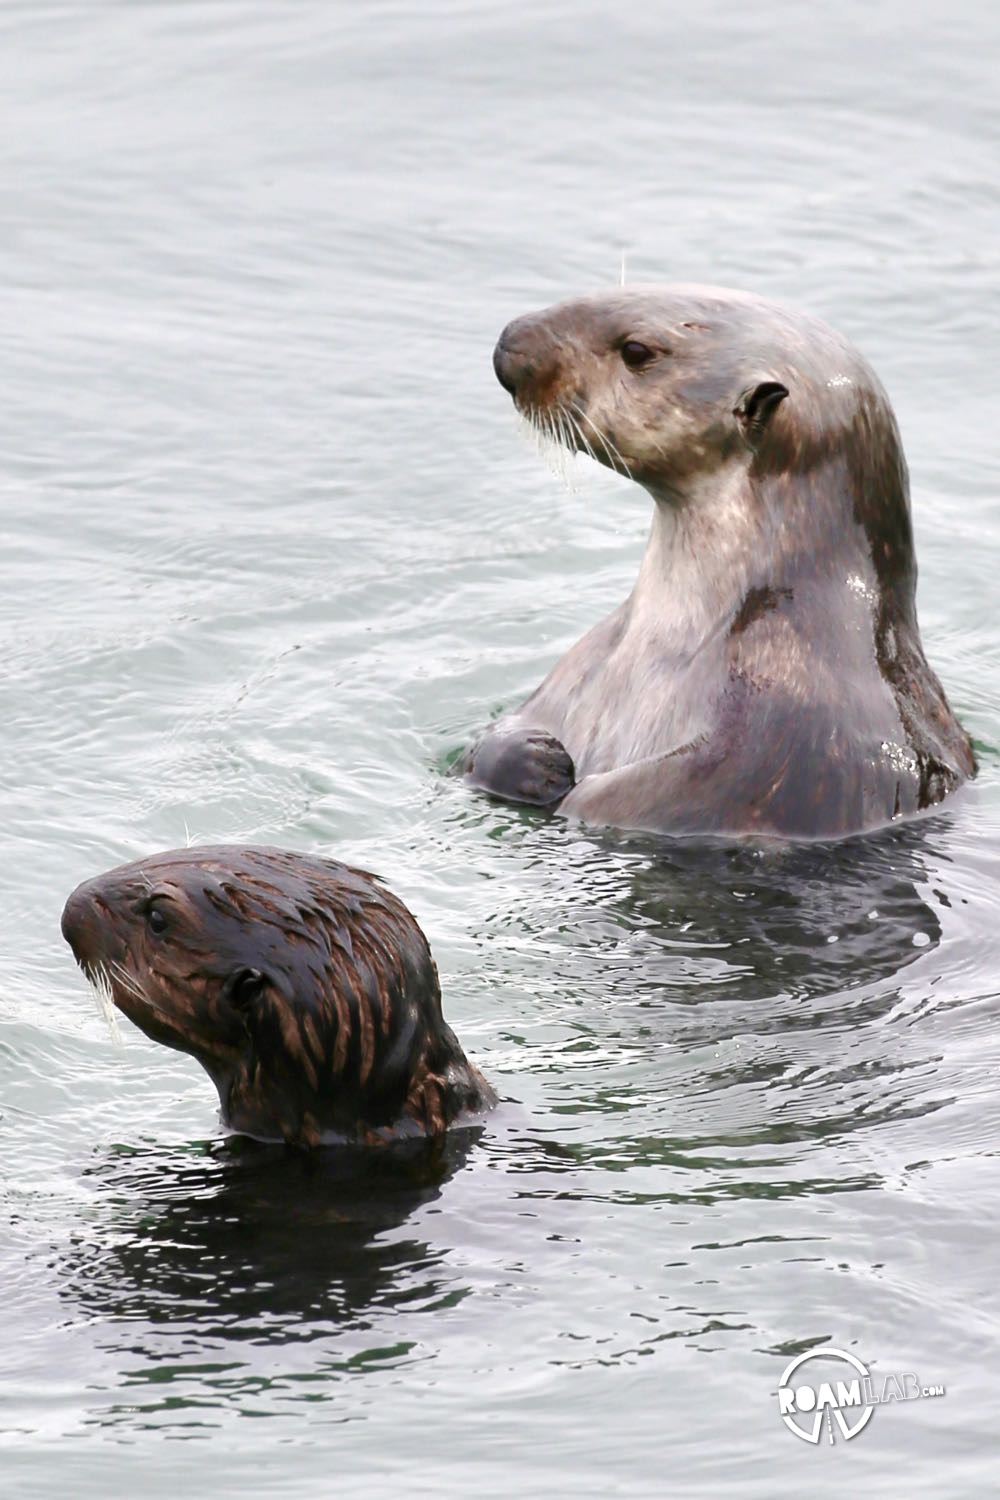 Mother sea otter and her pup in Morro Bay, California